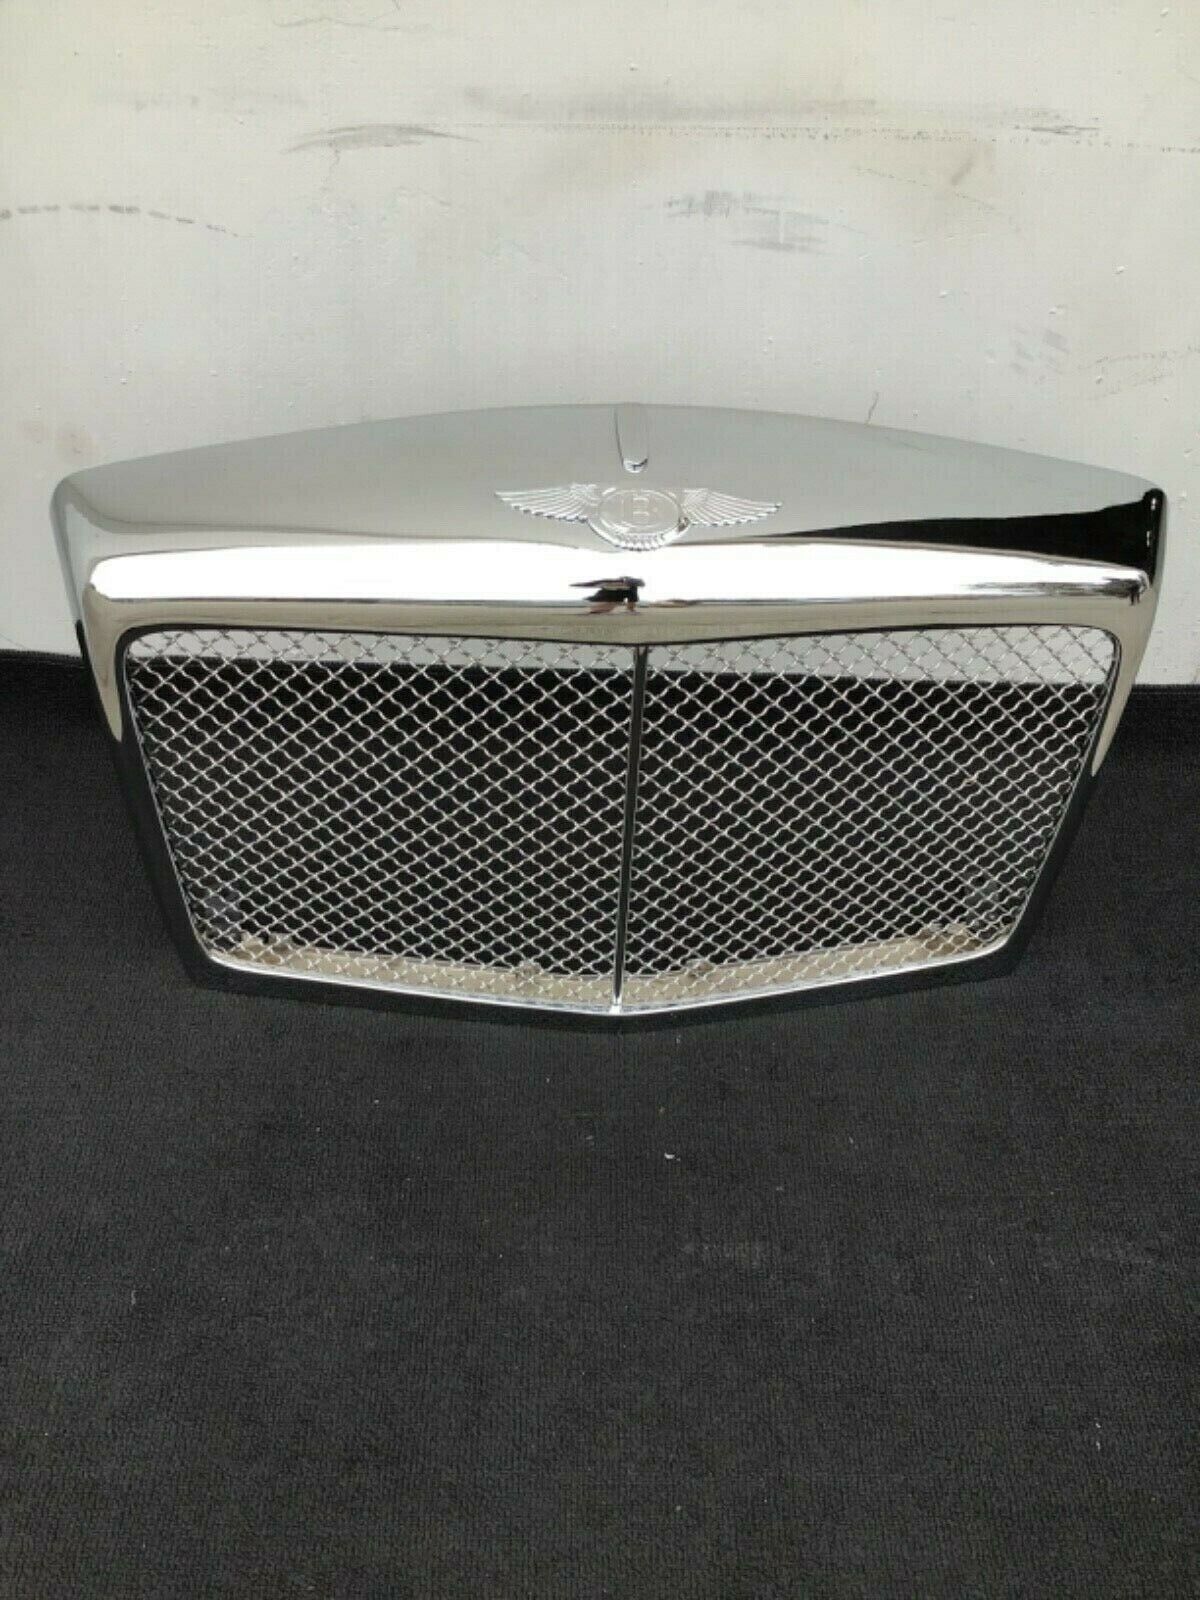  Bentley Eight Mulsanne Chrome grille & wire mesh & Bentley wing emblem Excellnt